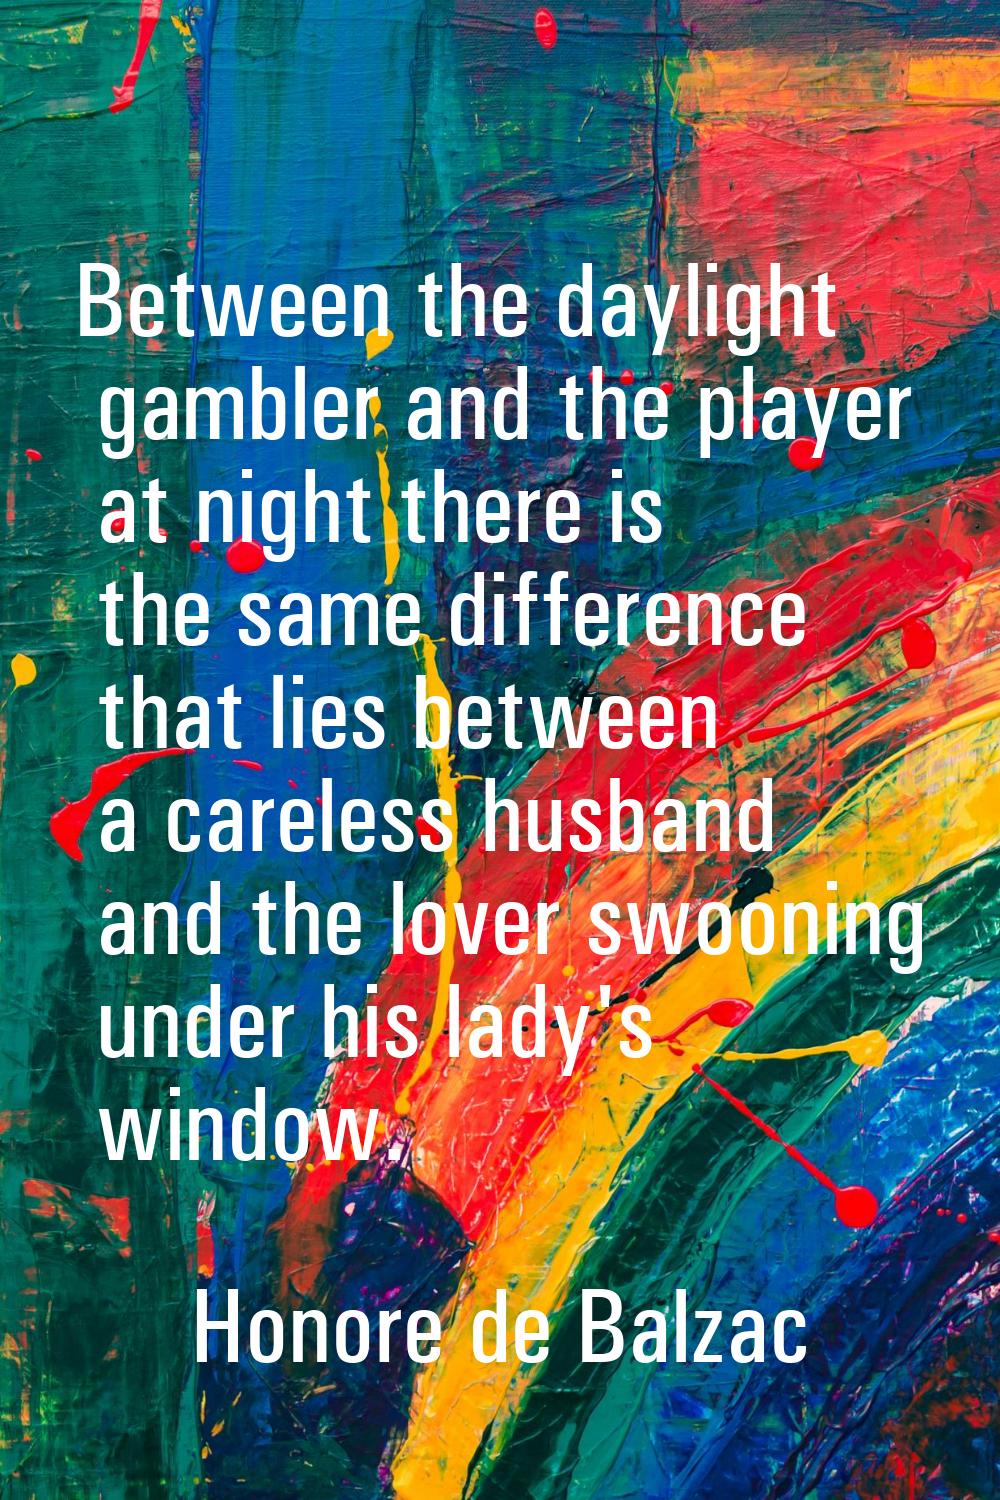 Between the daylight gambler and the player at night there is the same difference that lies between